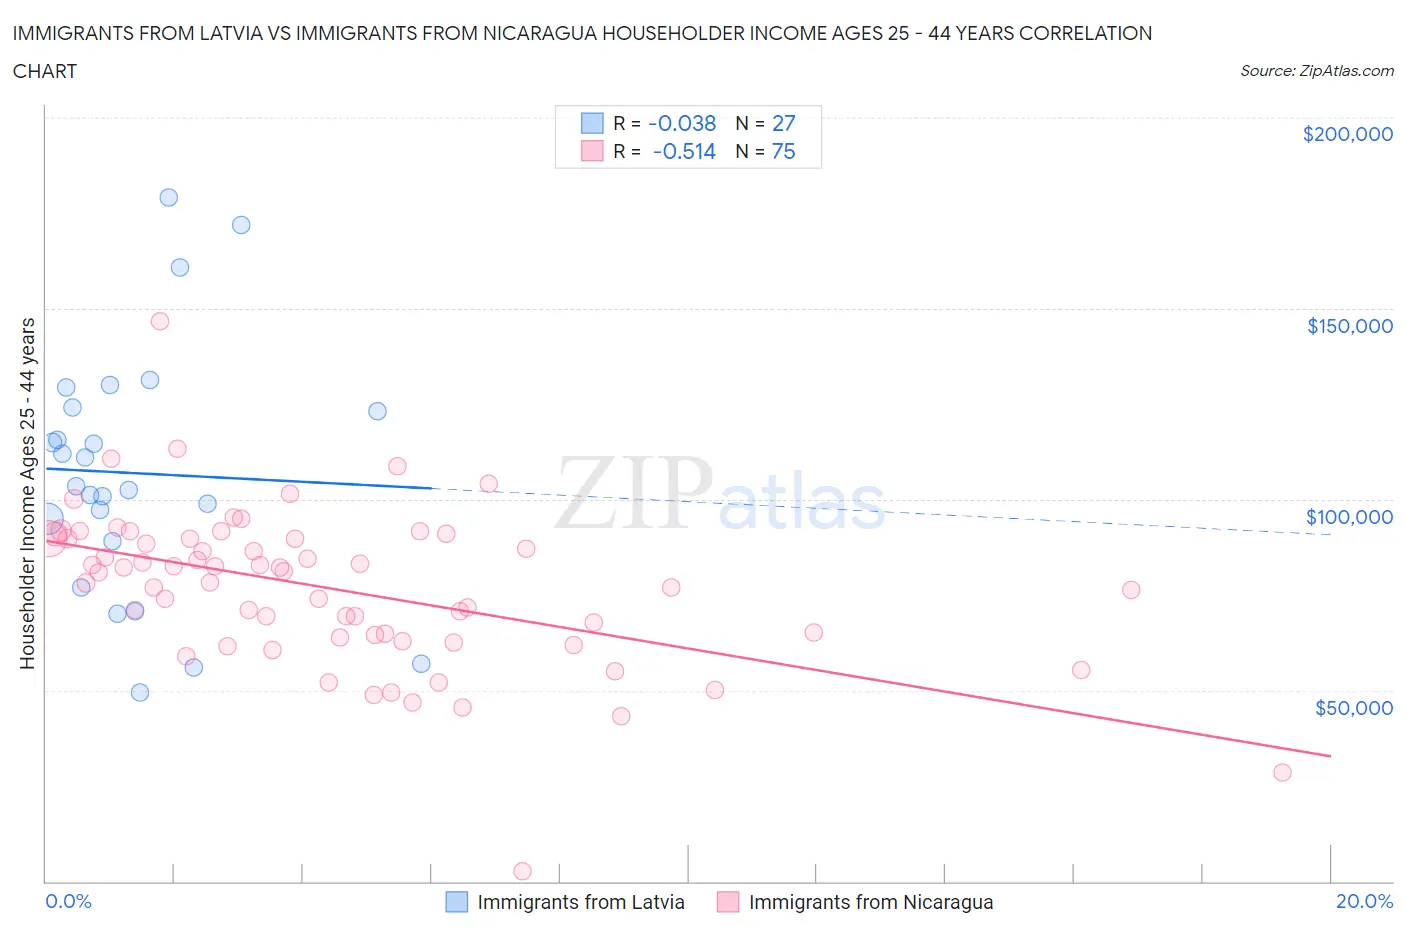 Immigrants from Latvia vs Immigrants from Nicaragua Householder Income Ages 25 - 44 years